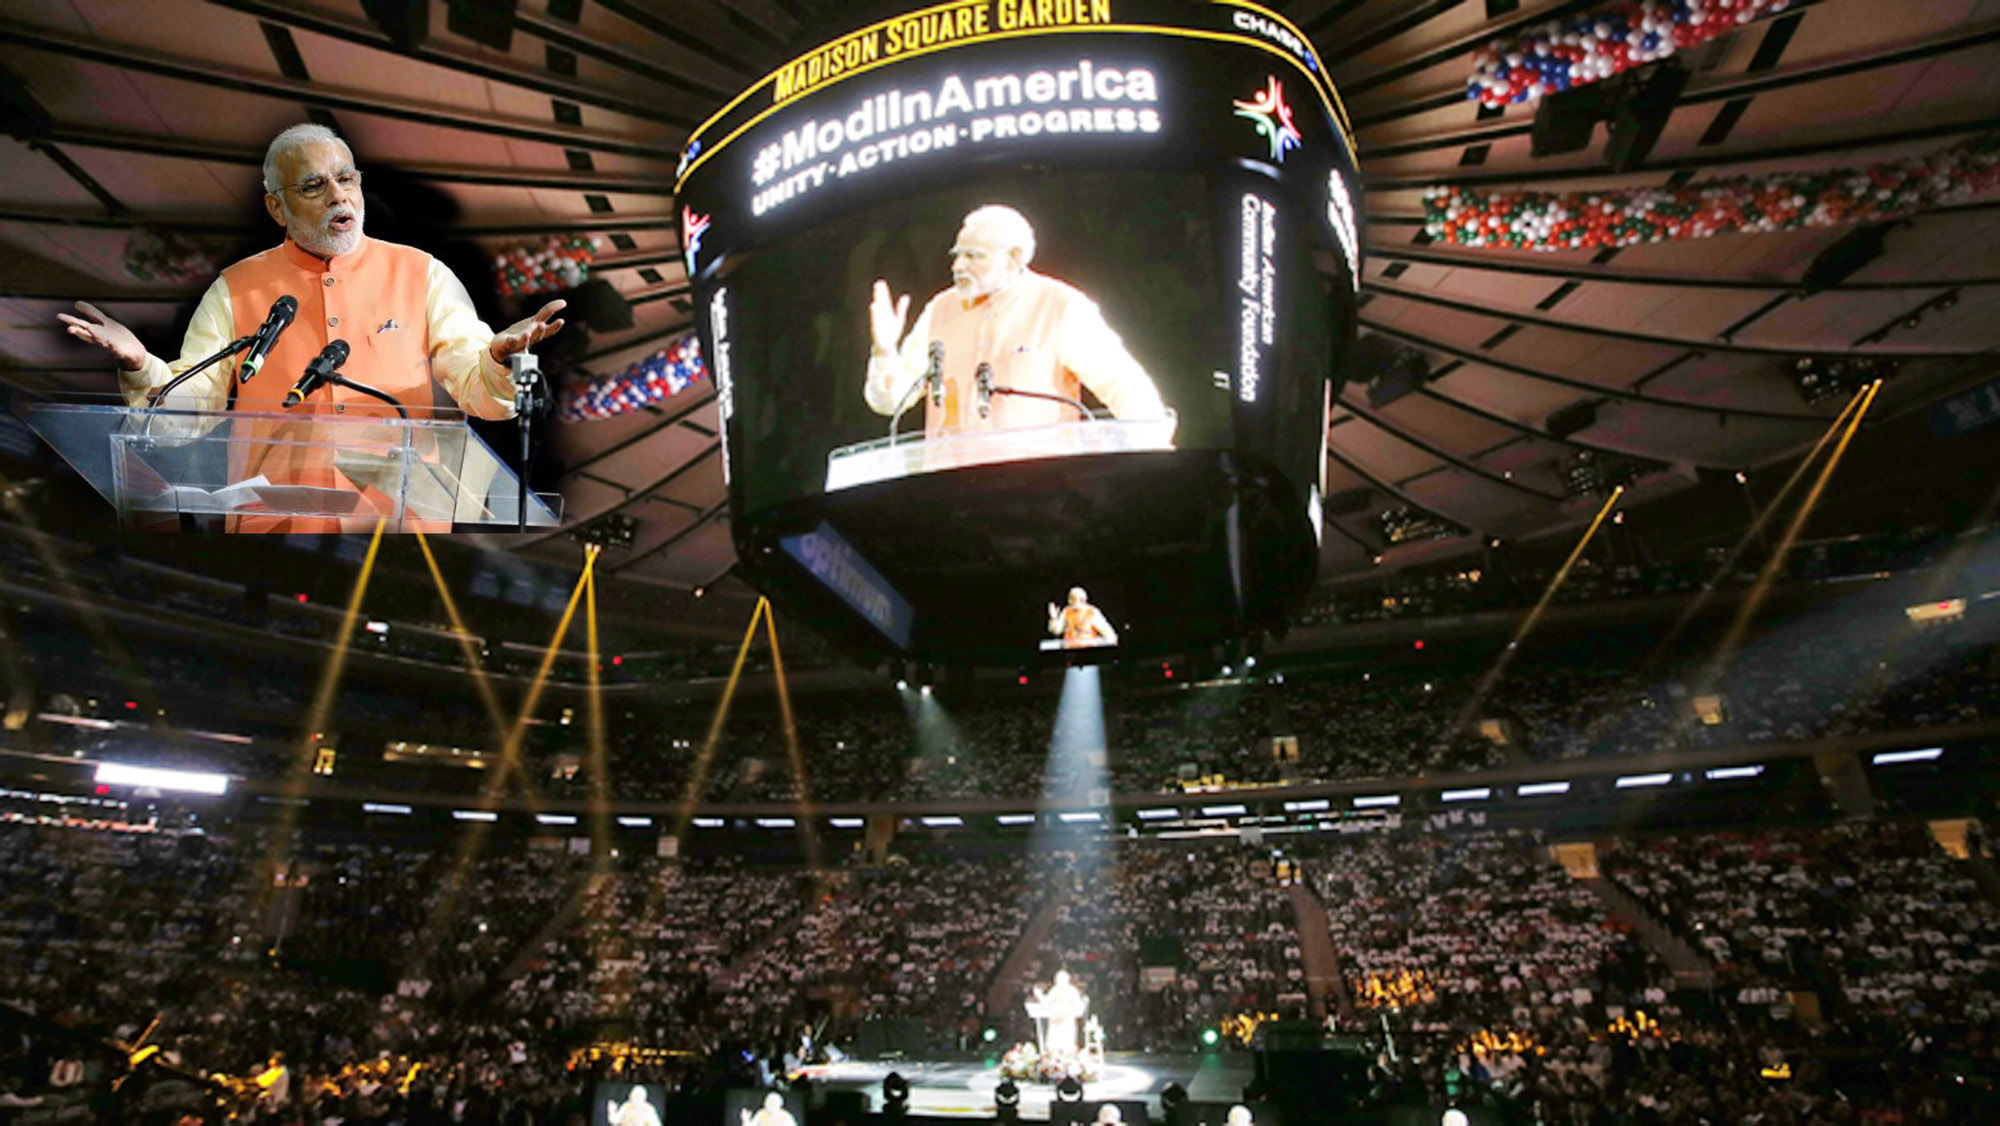 PM’s address to Indian Community at Madison Square Garden, New York